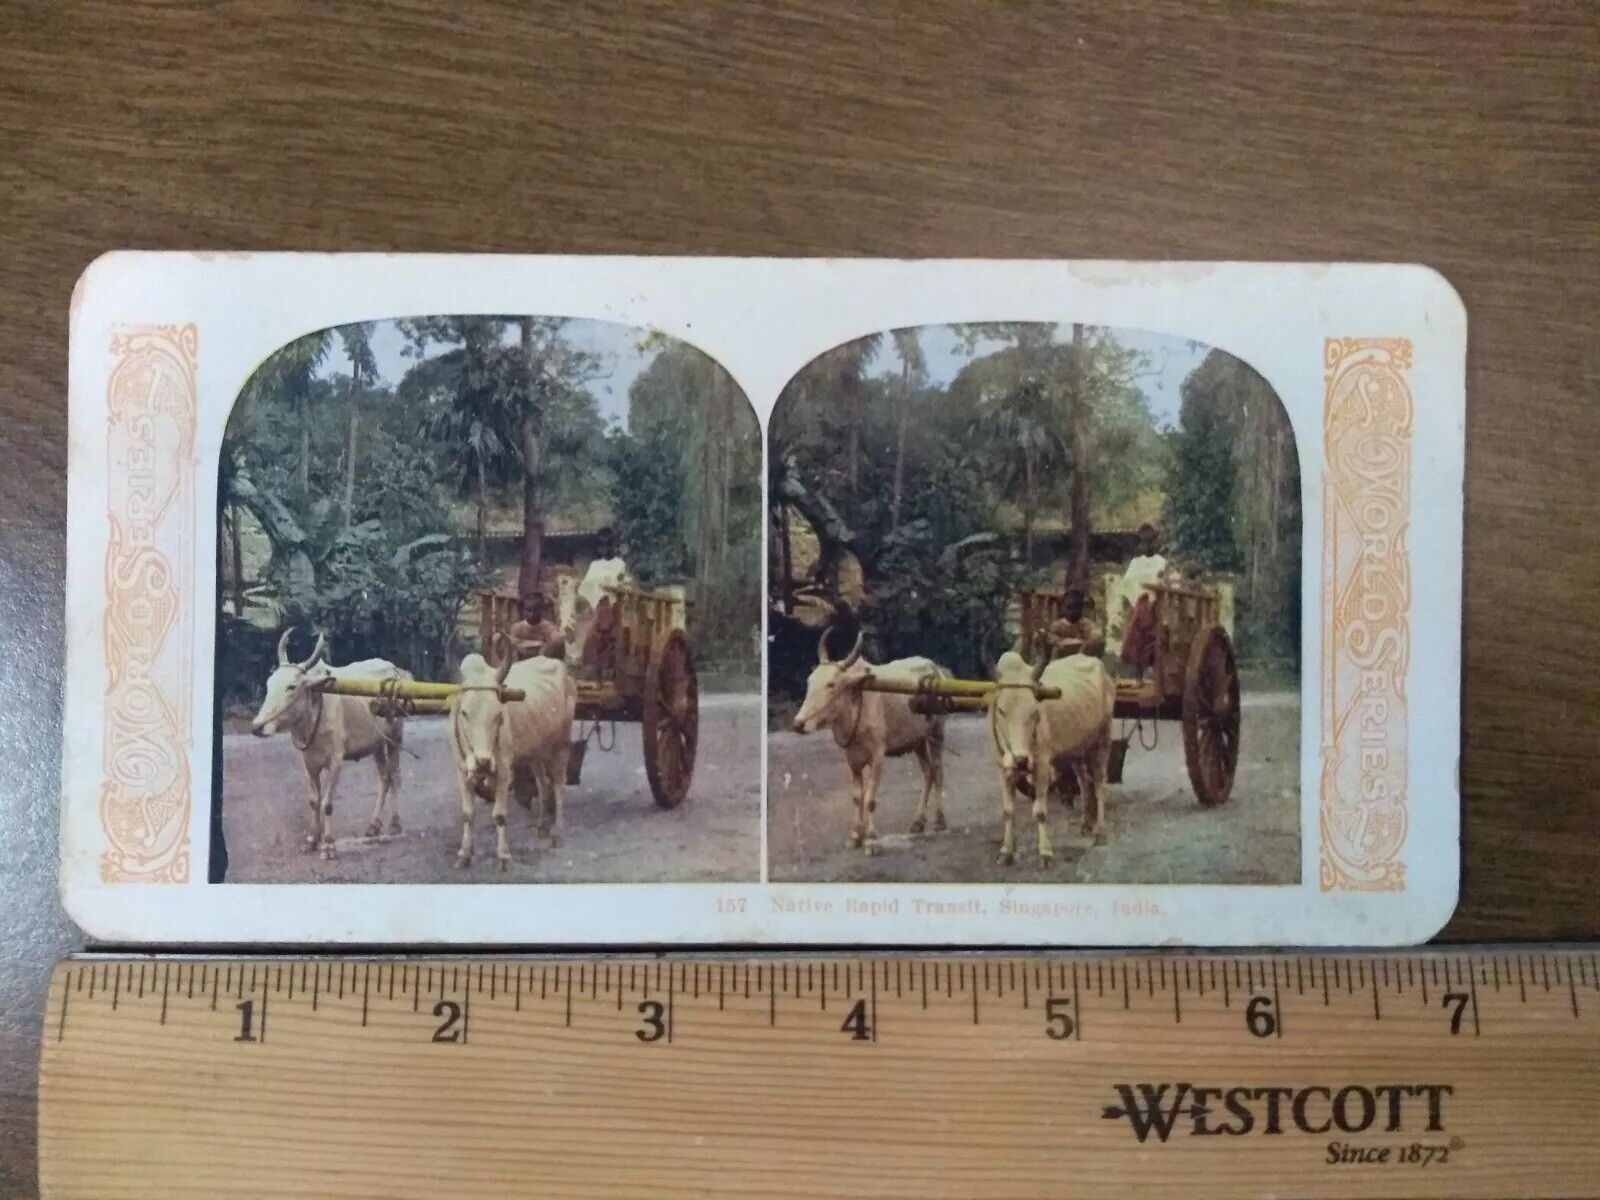 Antique Stereoscope Slide #157 1905 Stereoview Singapore India Cows Transport